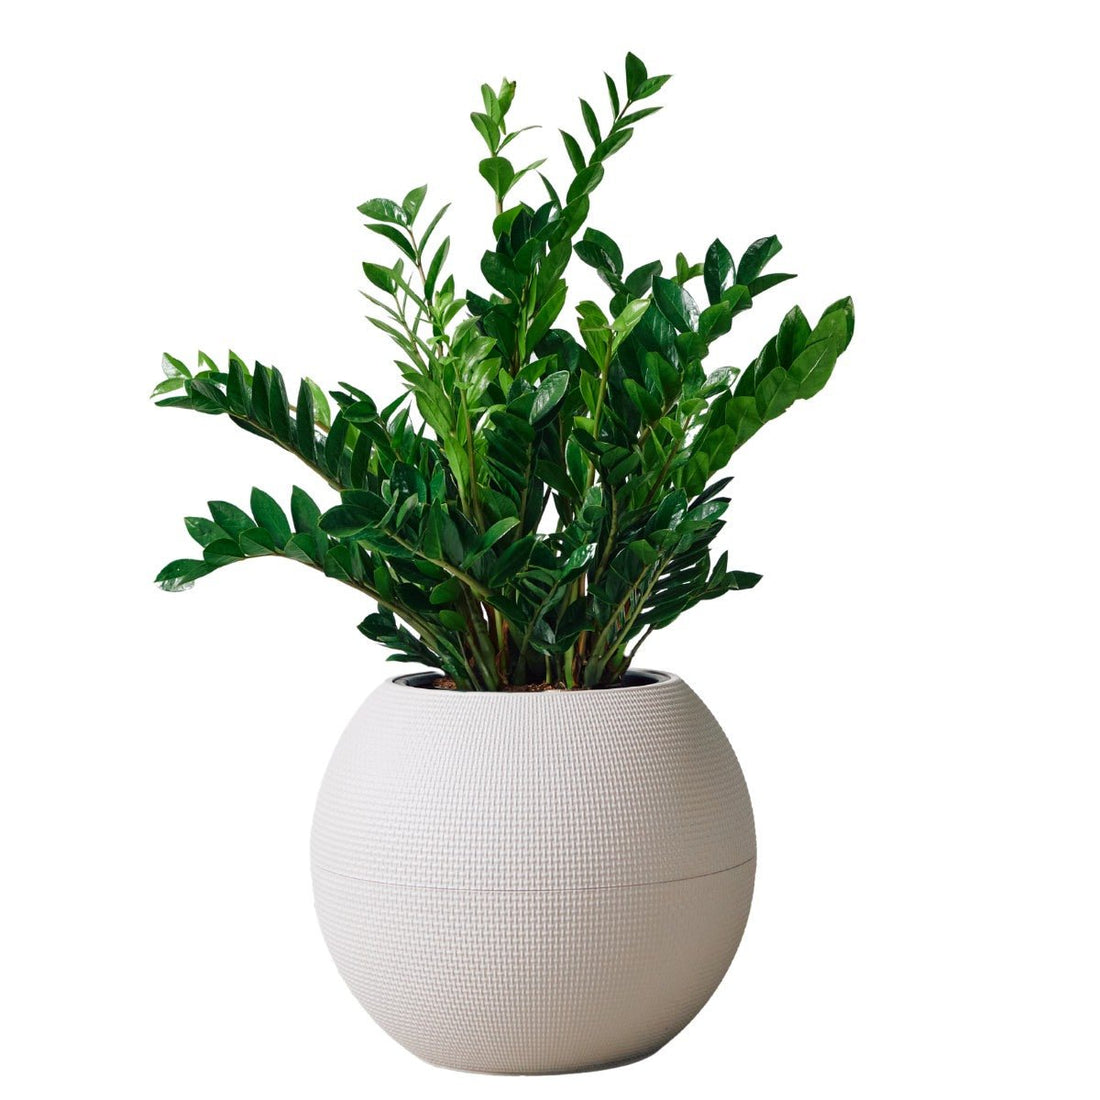 ZZ Plant Potted In Lechuza Puro Planter - Sand Brown - My City Plants